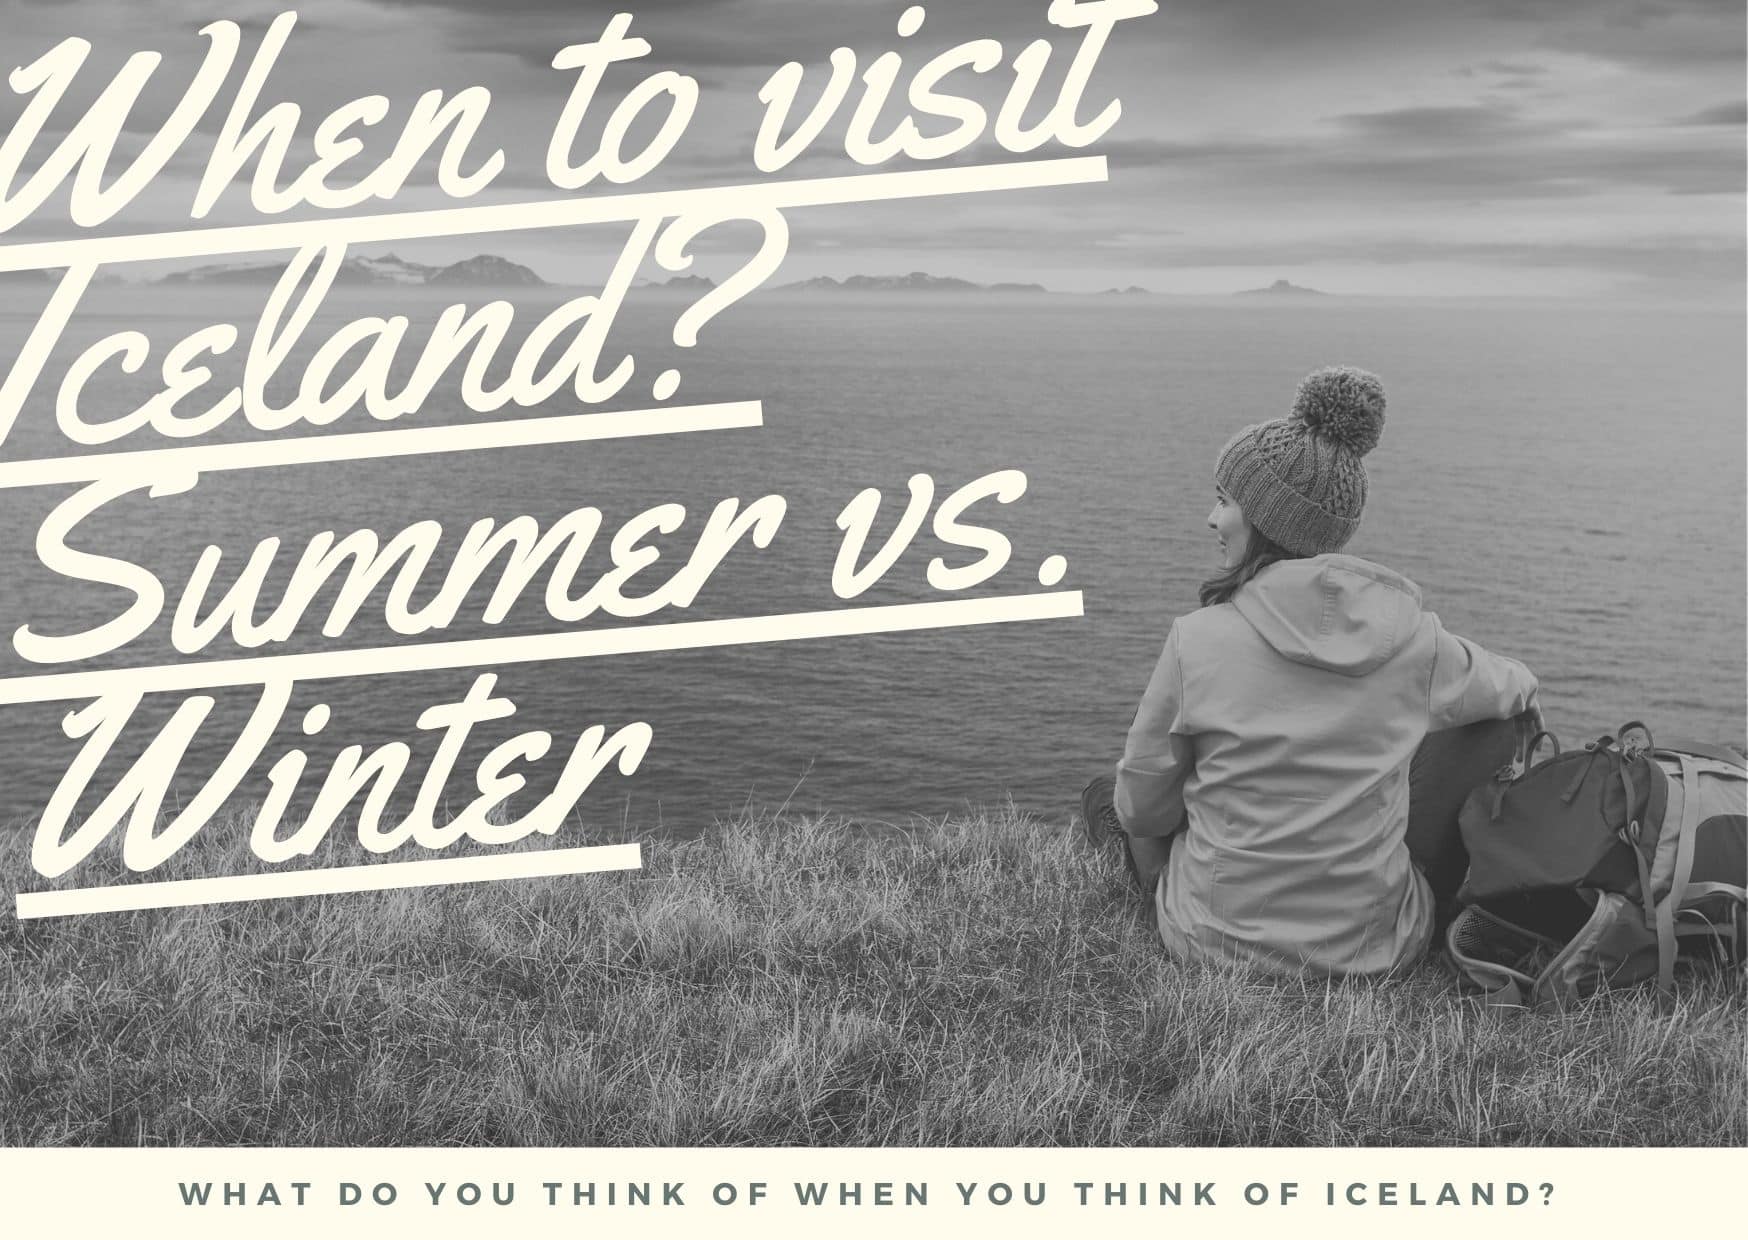 When to visit Iceland Summer vs. Winter